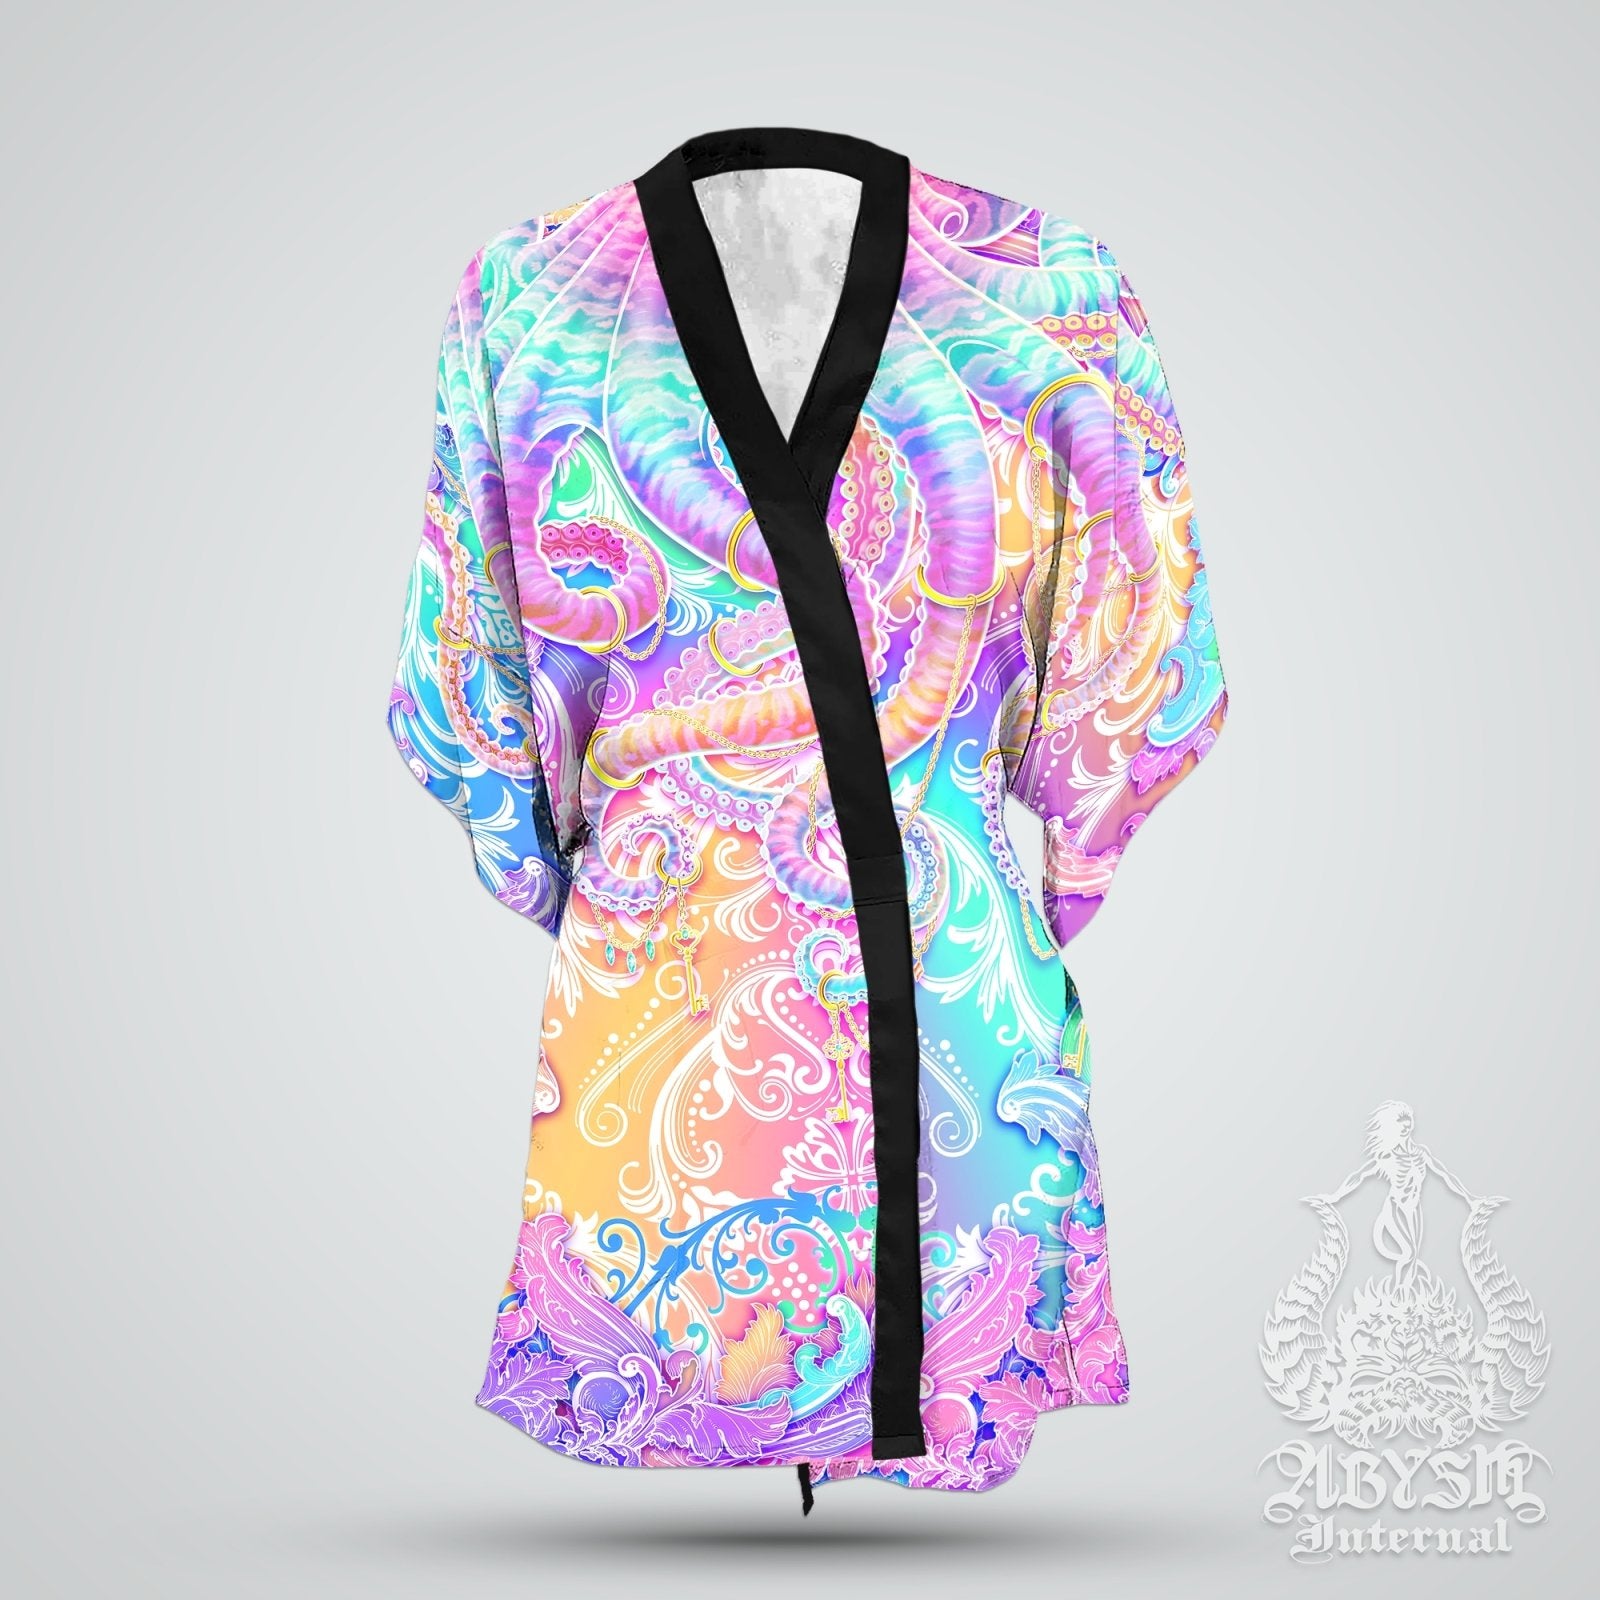 Beach Cover Up, Beach Rave Outfit, Octopus Party Kimono, Summer Festival Robe, Aesthetic Indie and Alternative Clothing, Unisex - Holographic Pastel - Abysm Internal